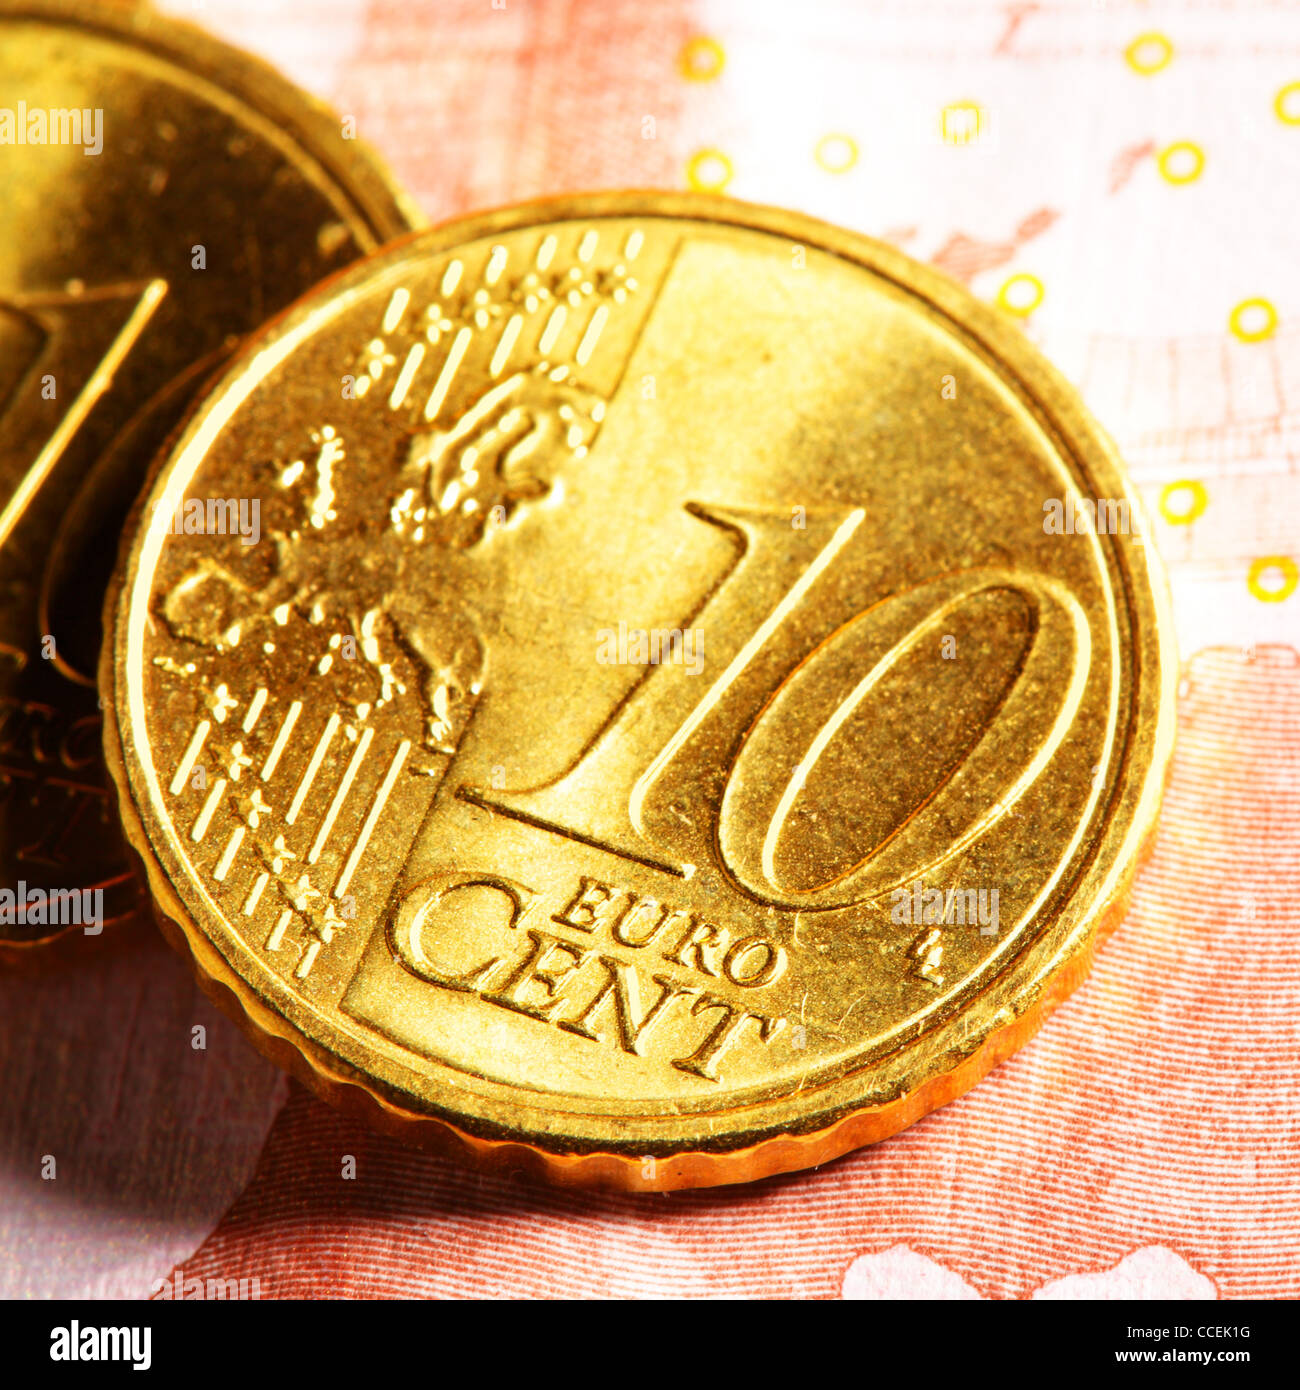 Ten euro cent coins close up on bank note Stock Photo